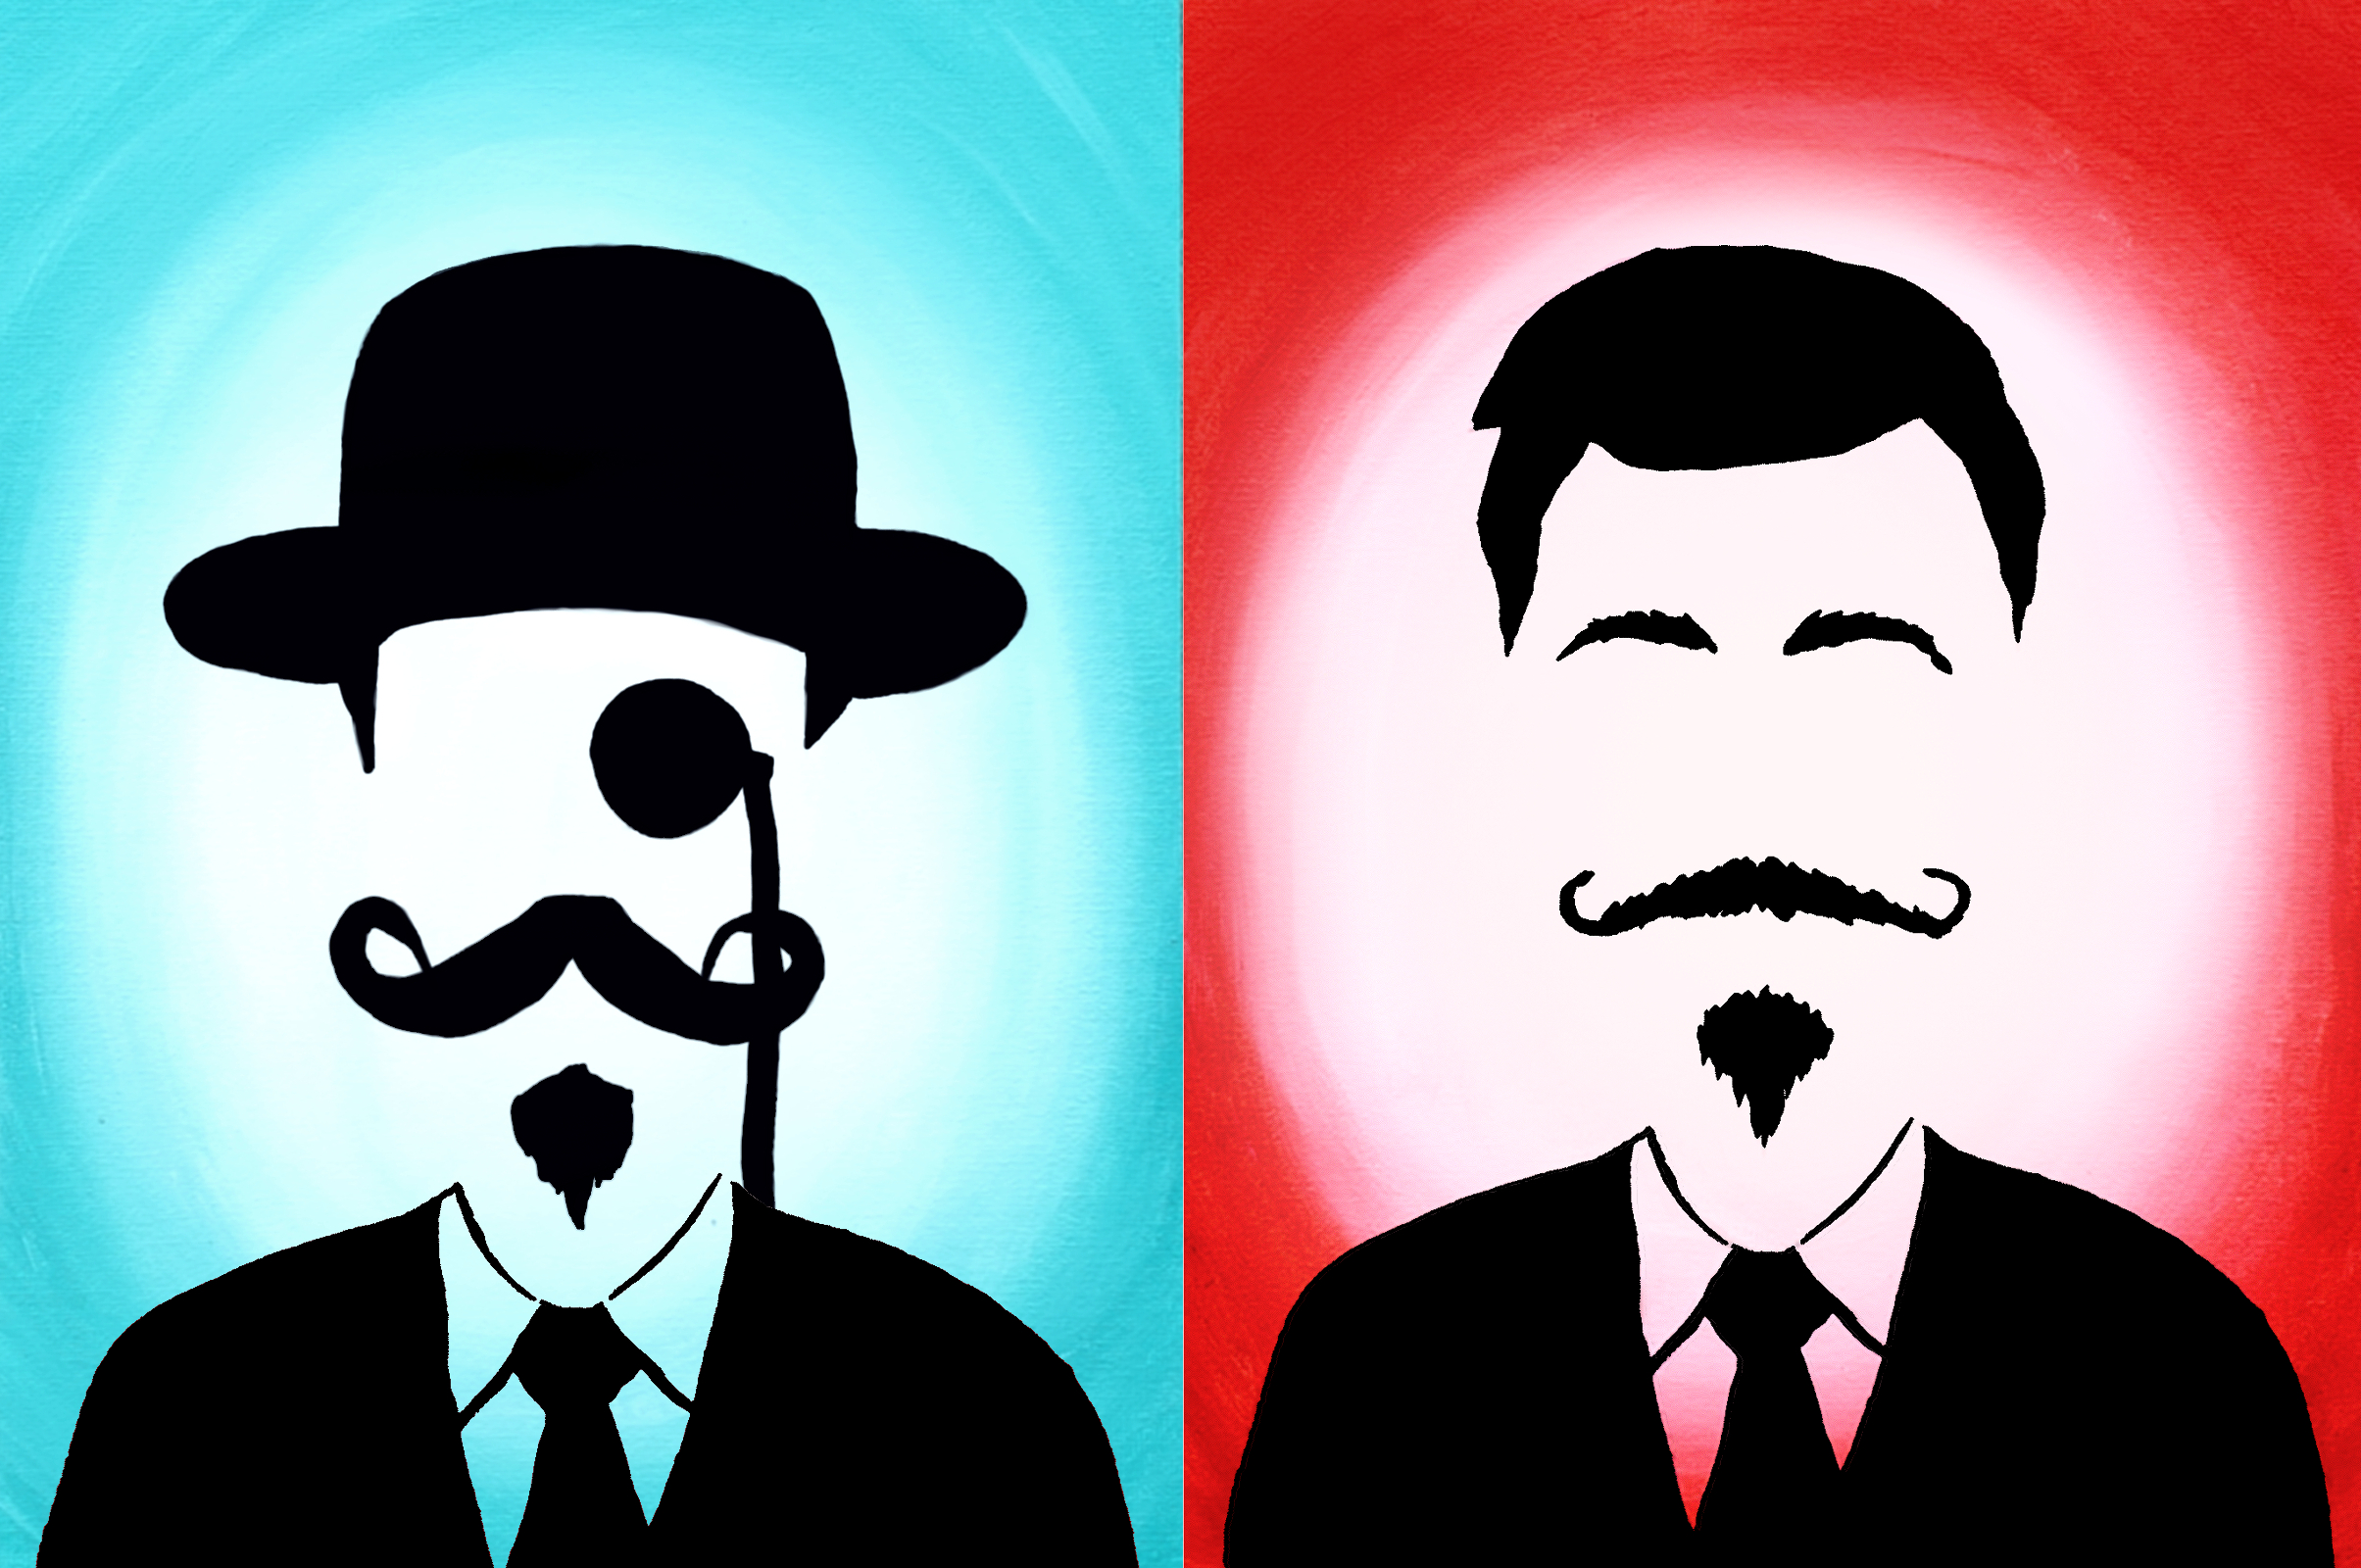 A Movember Partner Painting experience project by Yaymaker